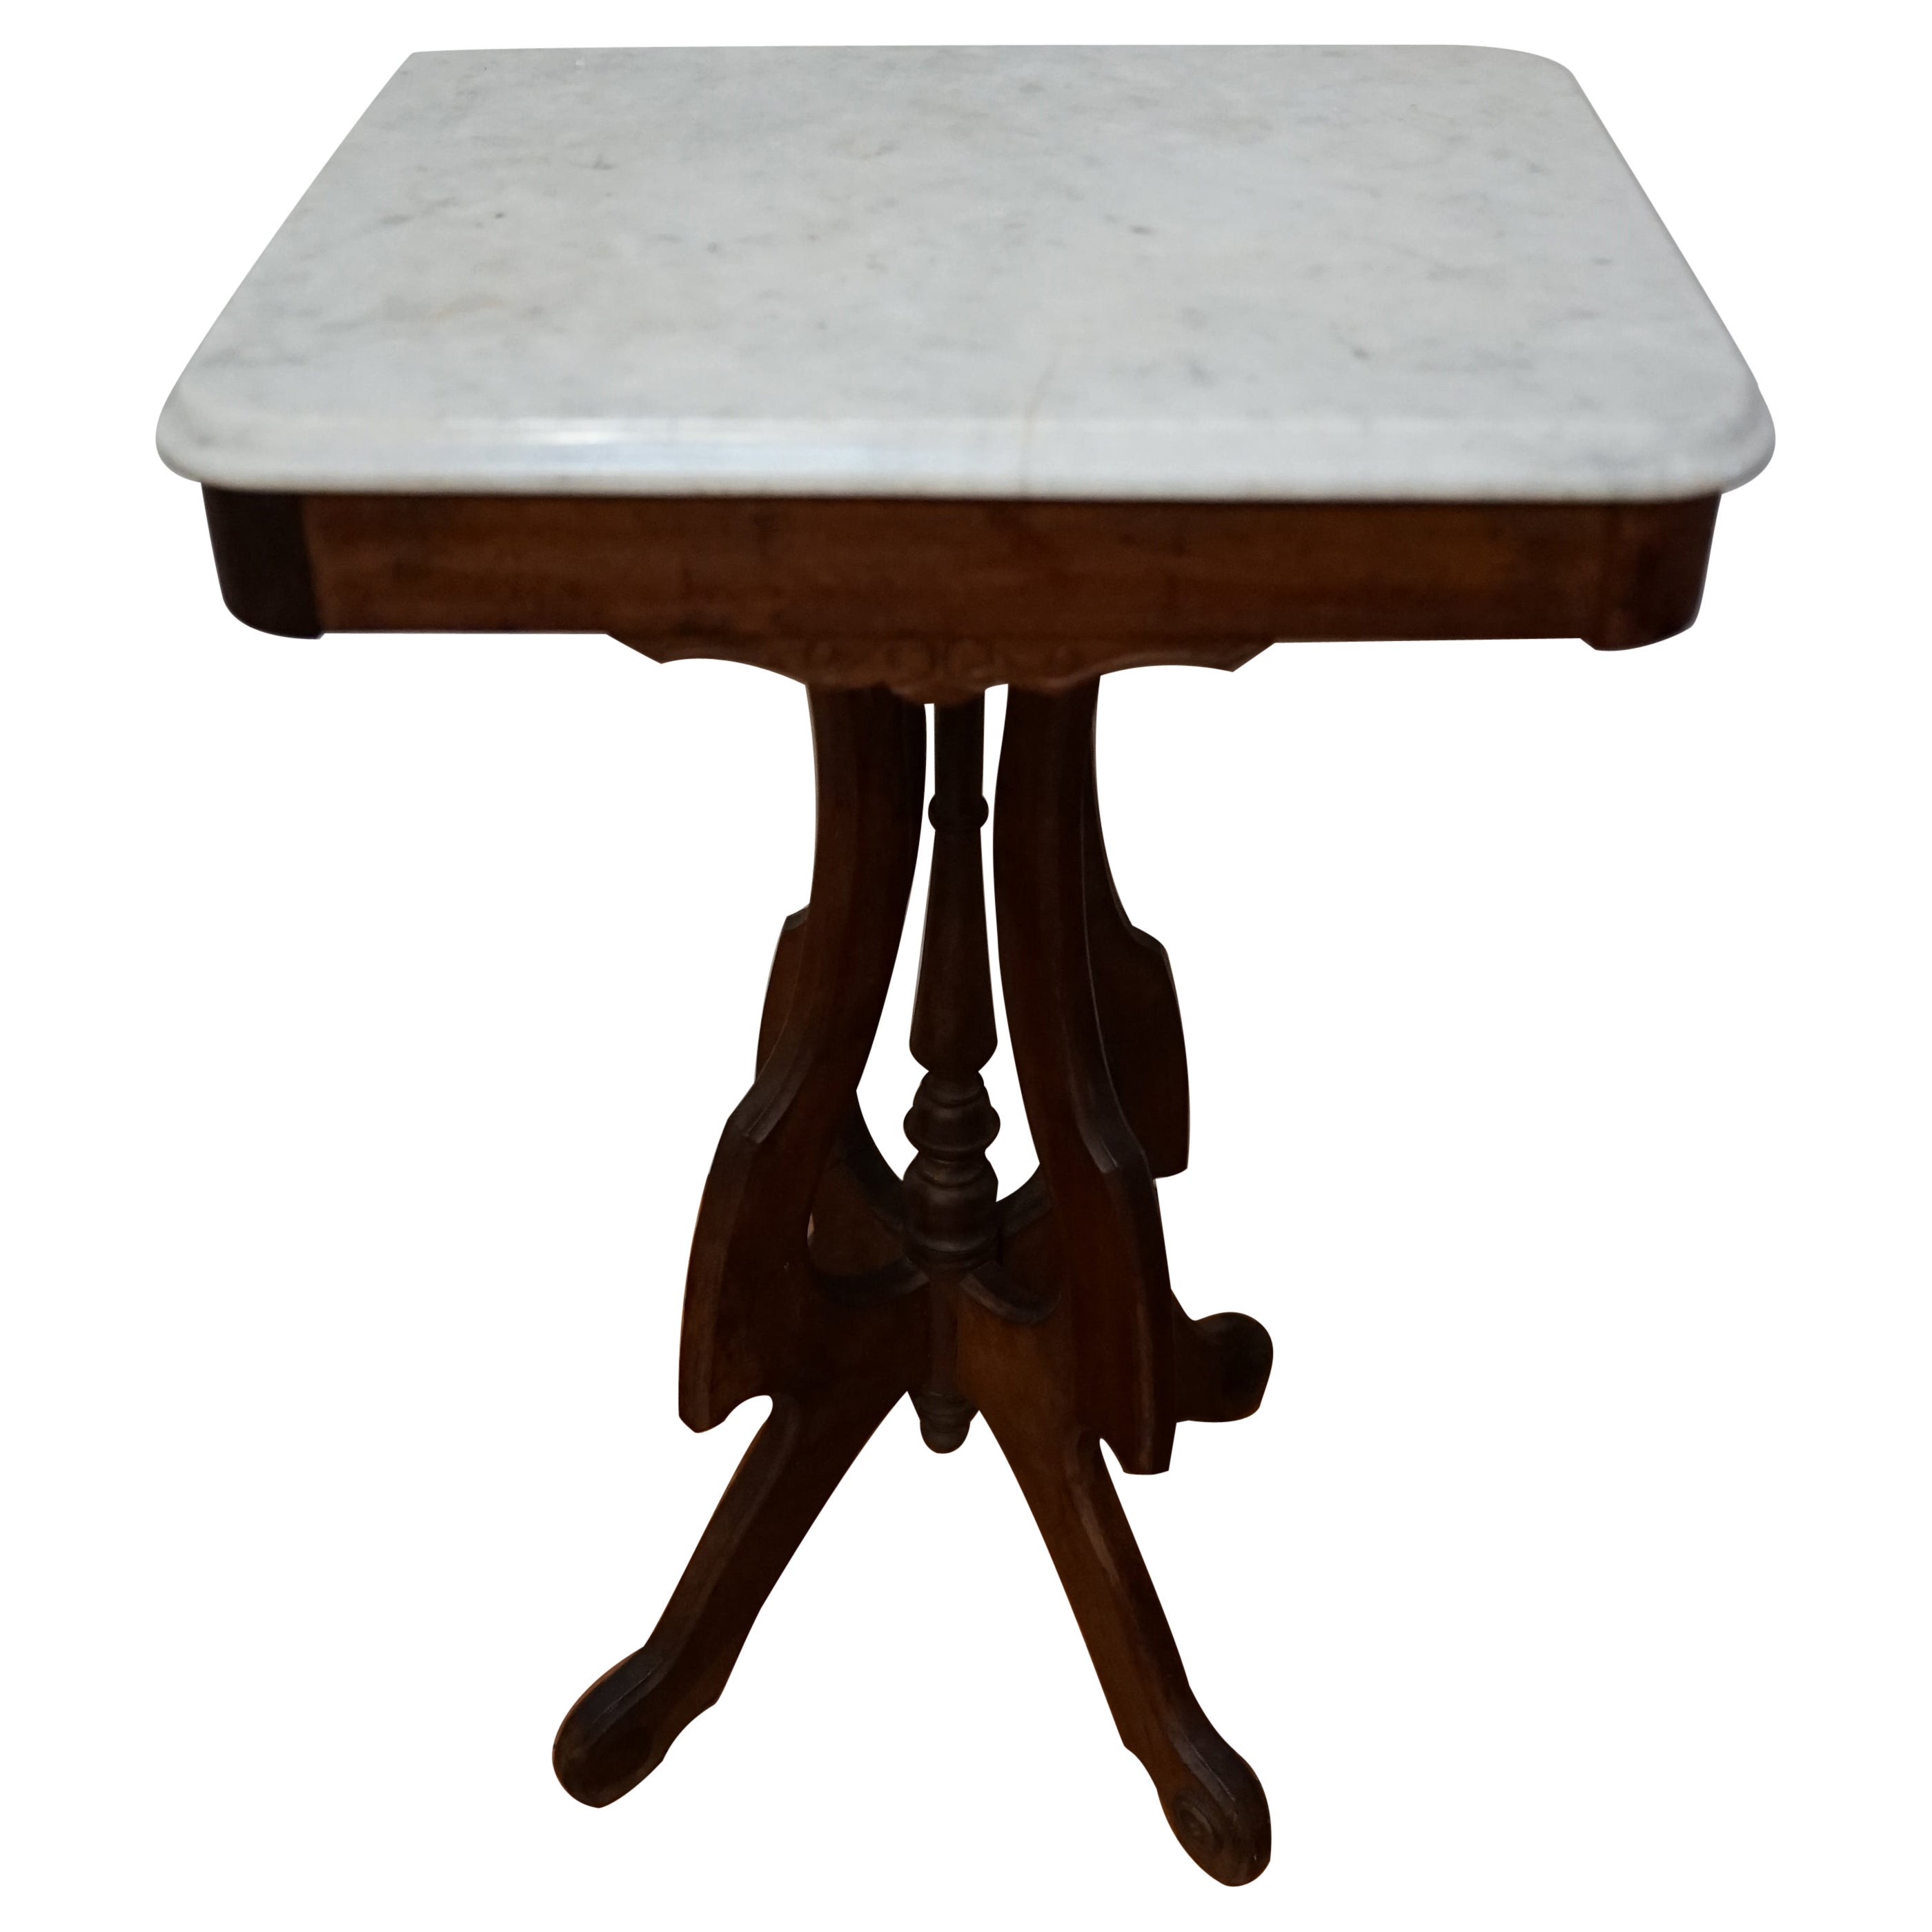 Victorian 1880 Walnut Carved Side Table with White Marble Top For Sale